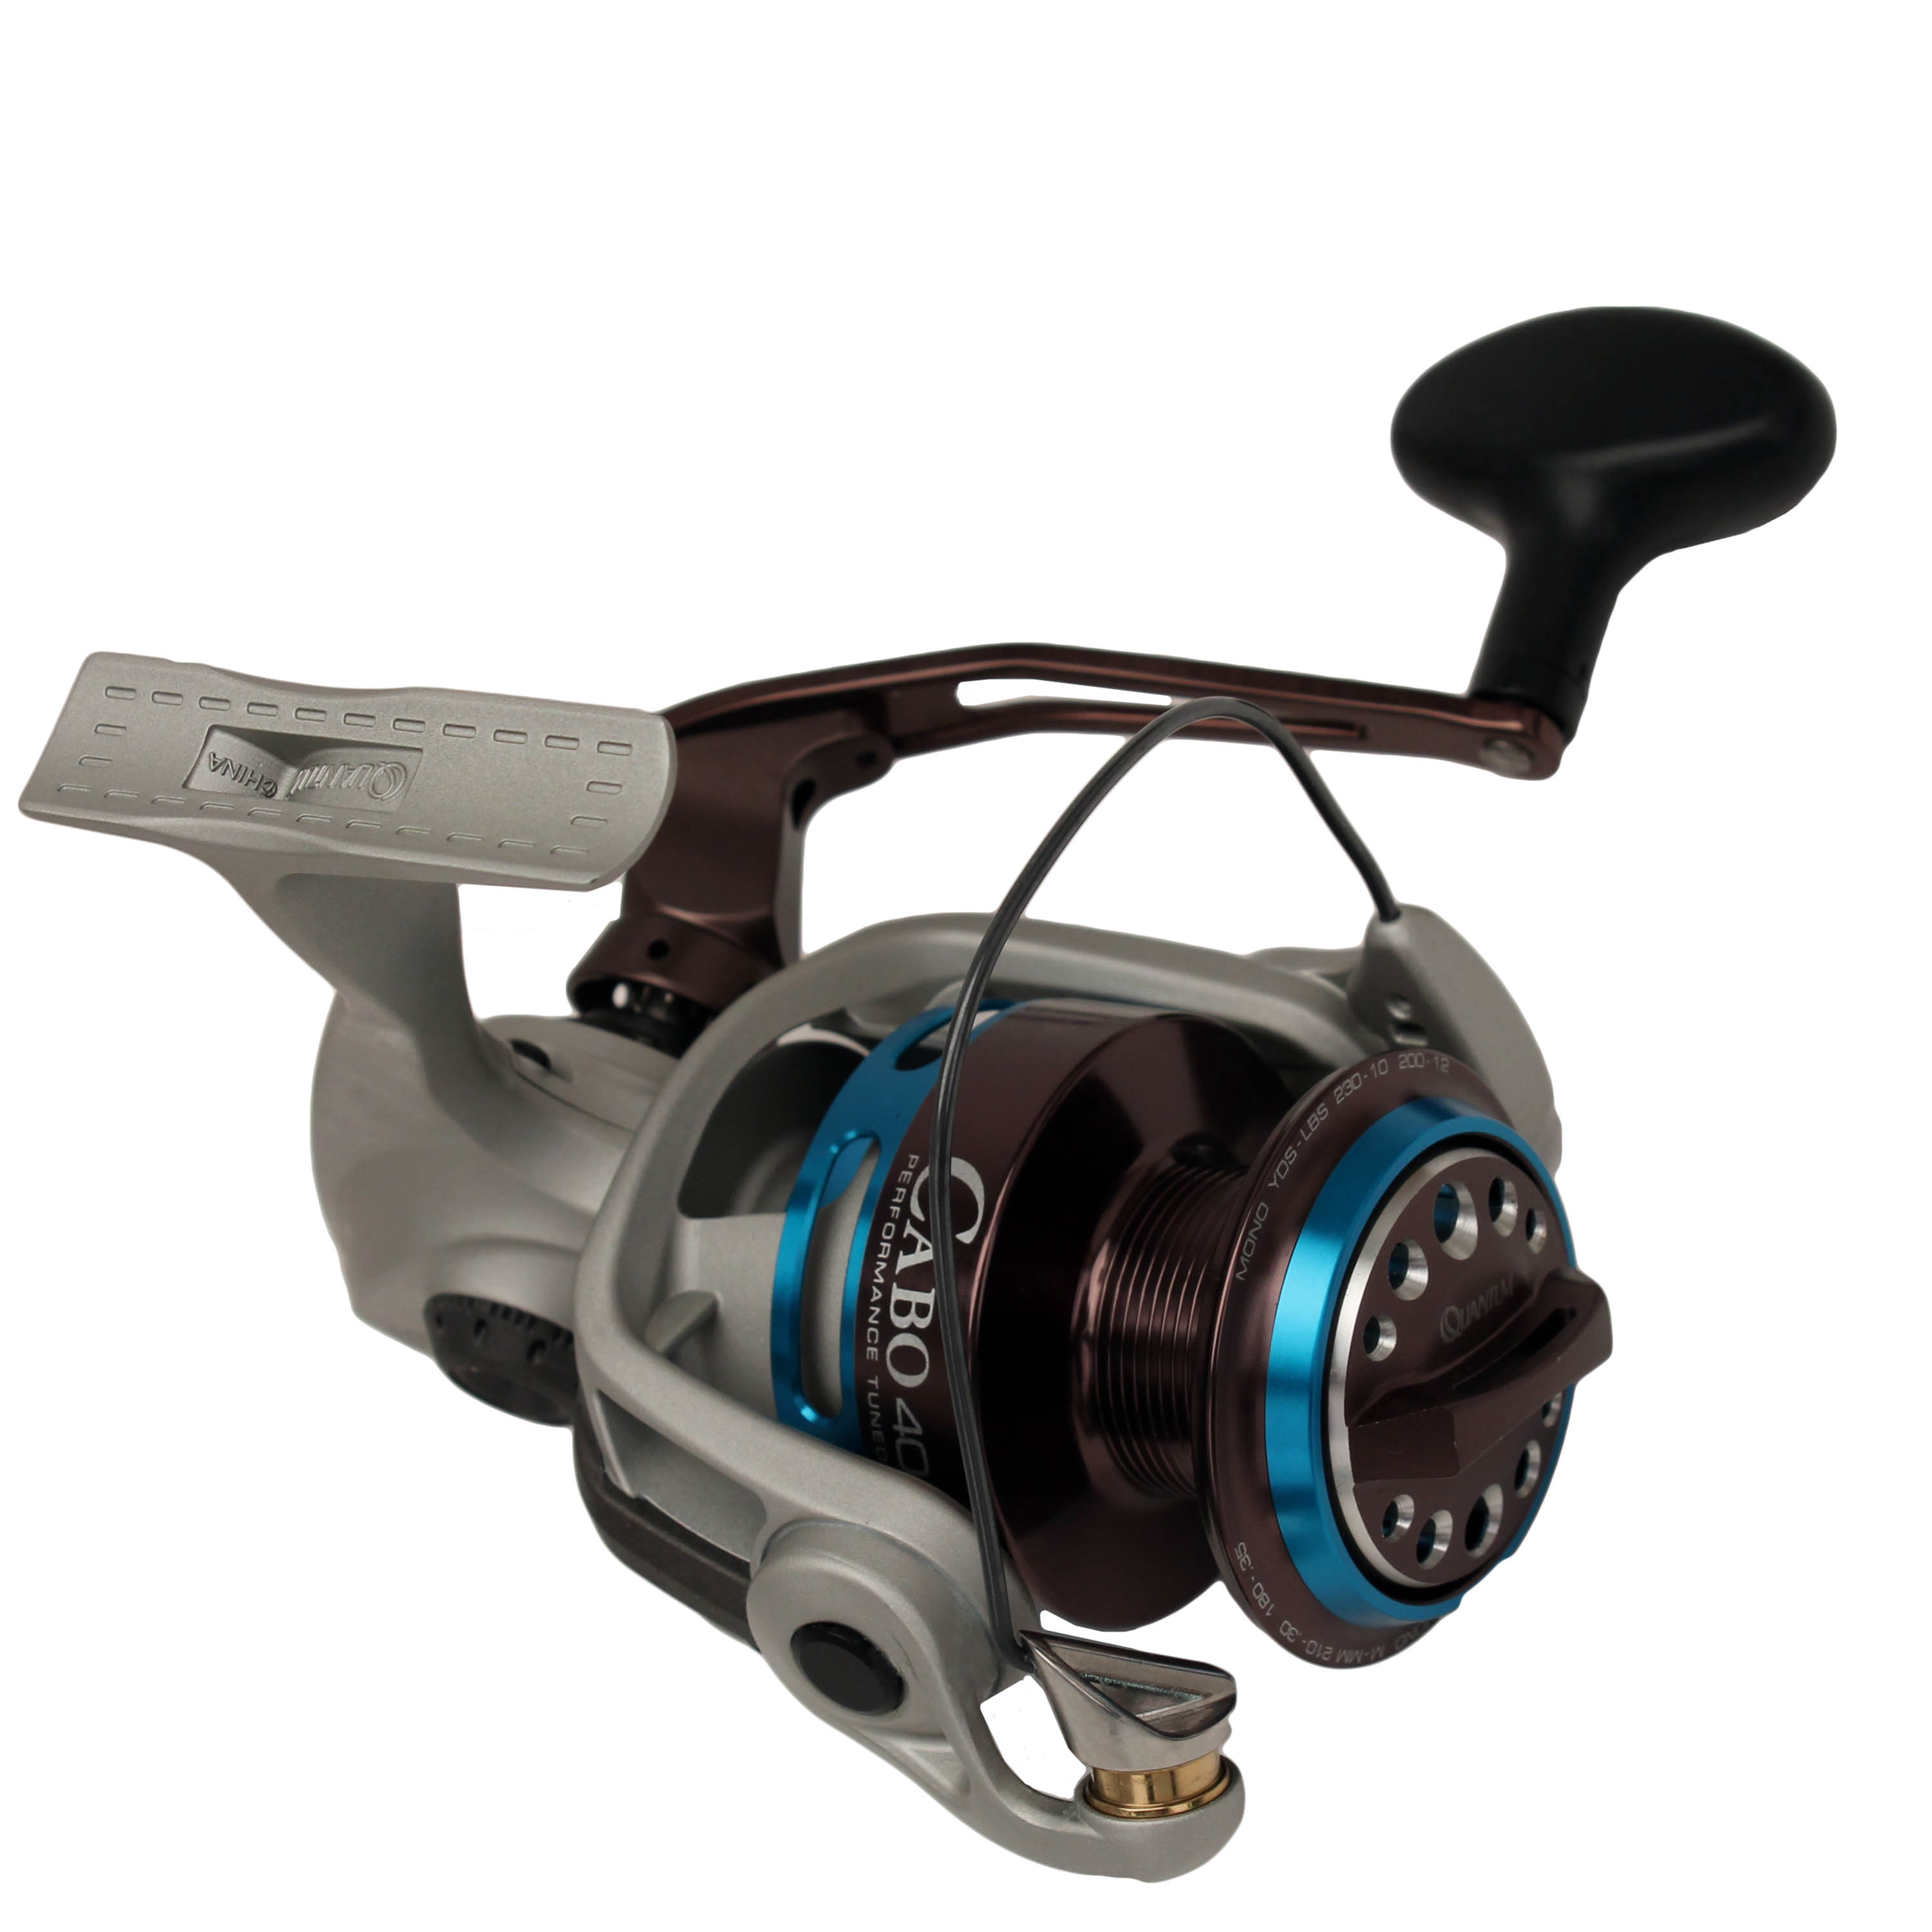 Spinning reel. Катушка Zebco cool. Mitchell: Spincast Reel Turbo Spin 30 -1/0. Катушка для нахлыста Zebco cool.